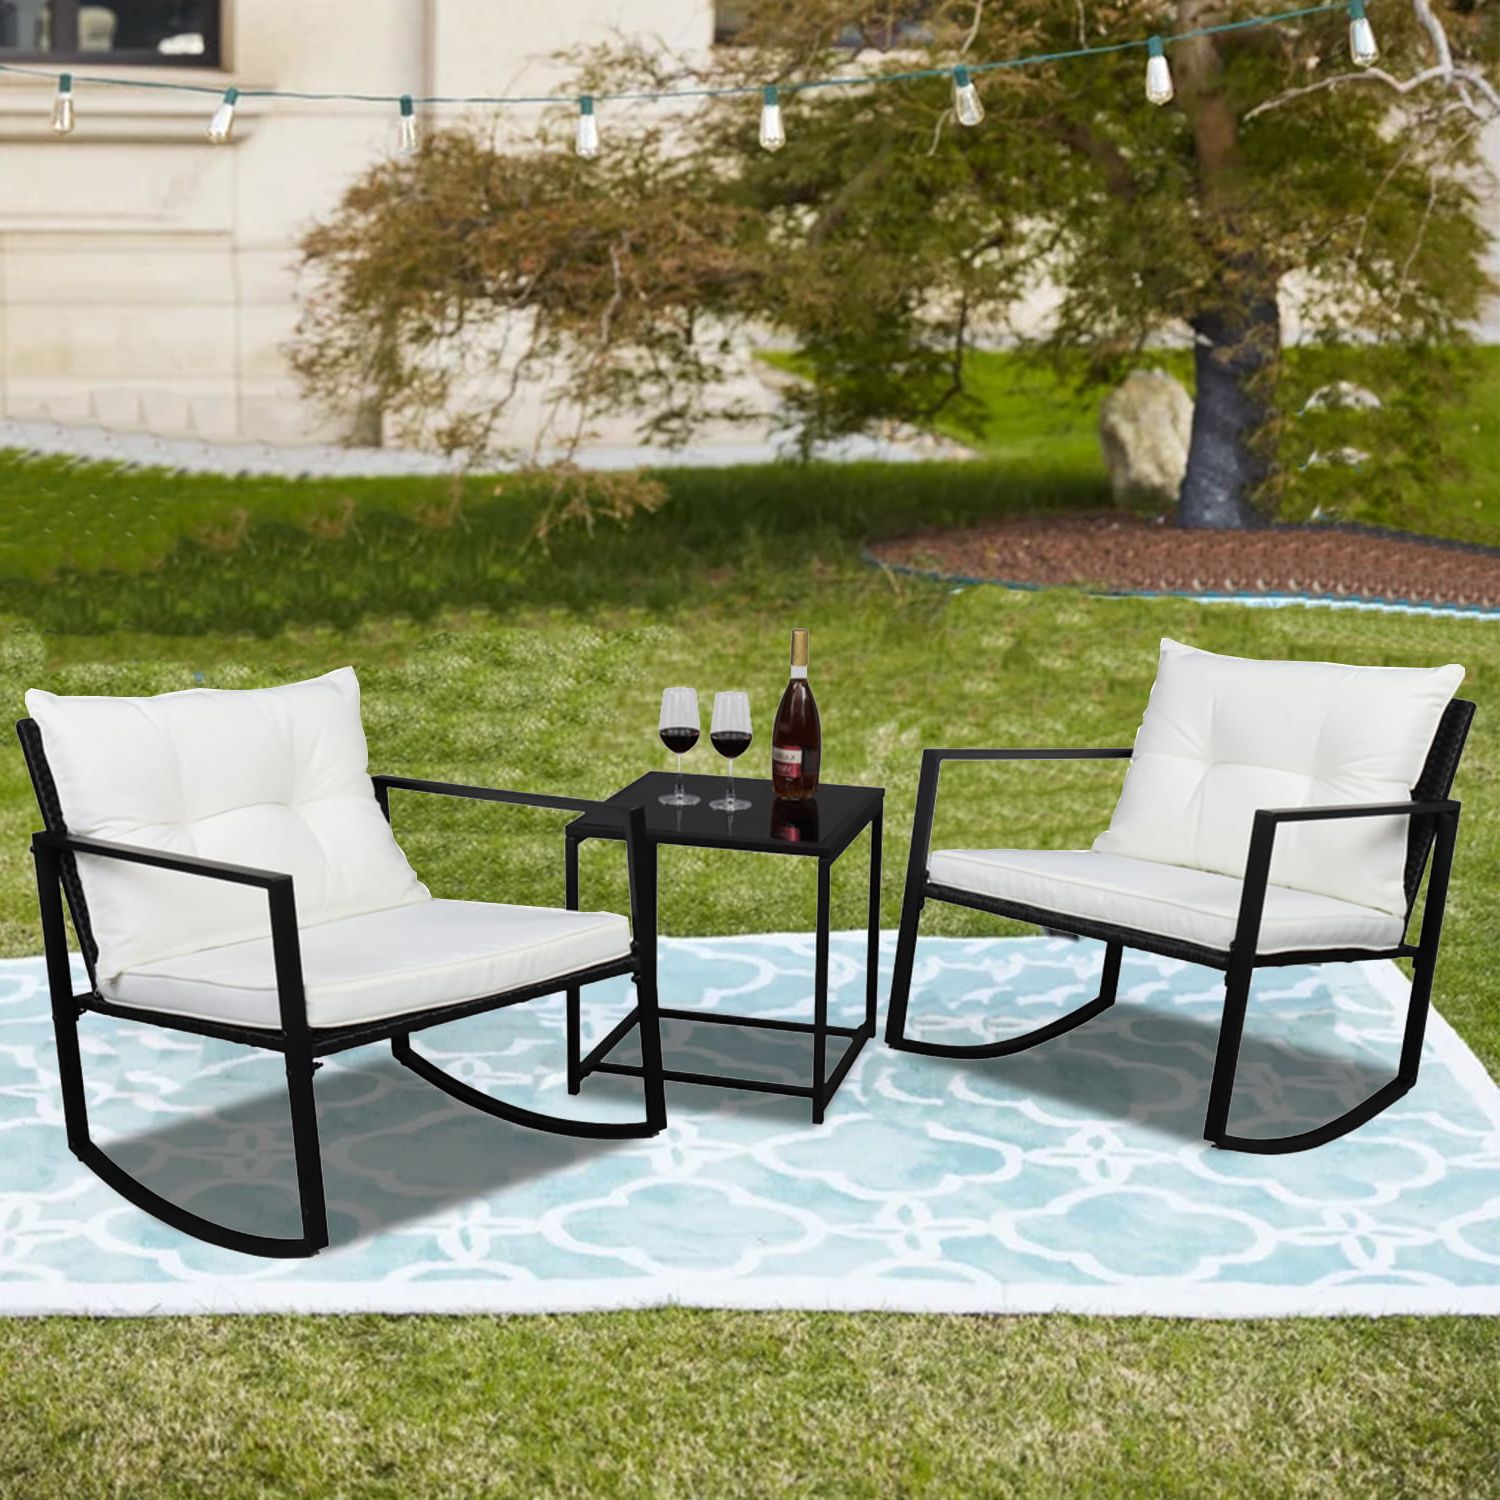 3 Piece Cushion Rocking Chair Set With Regard To Favorite Outdoor Rocking Chair 3 Piece Patio Set, Wicker Outdoor Patio Furniture  With Rocking Chair And Table, Patio Rocking Chair For Outdoor Garden,  All Weather Rocking Lounge Chair, White Cushion, W10677 – Walmart (View 10 of 15)